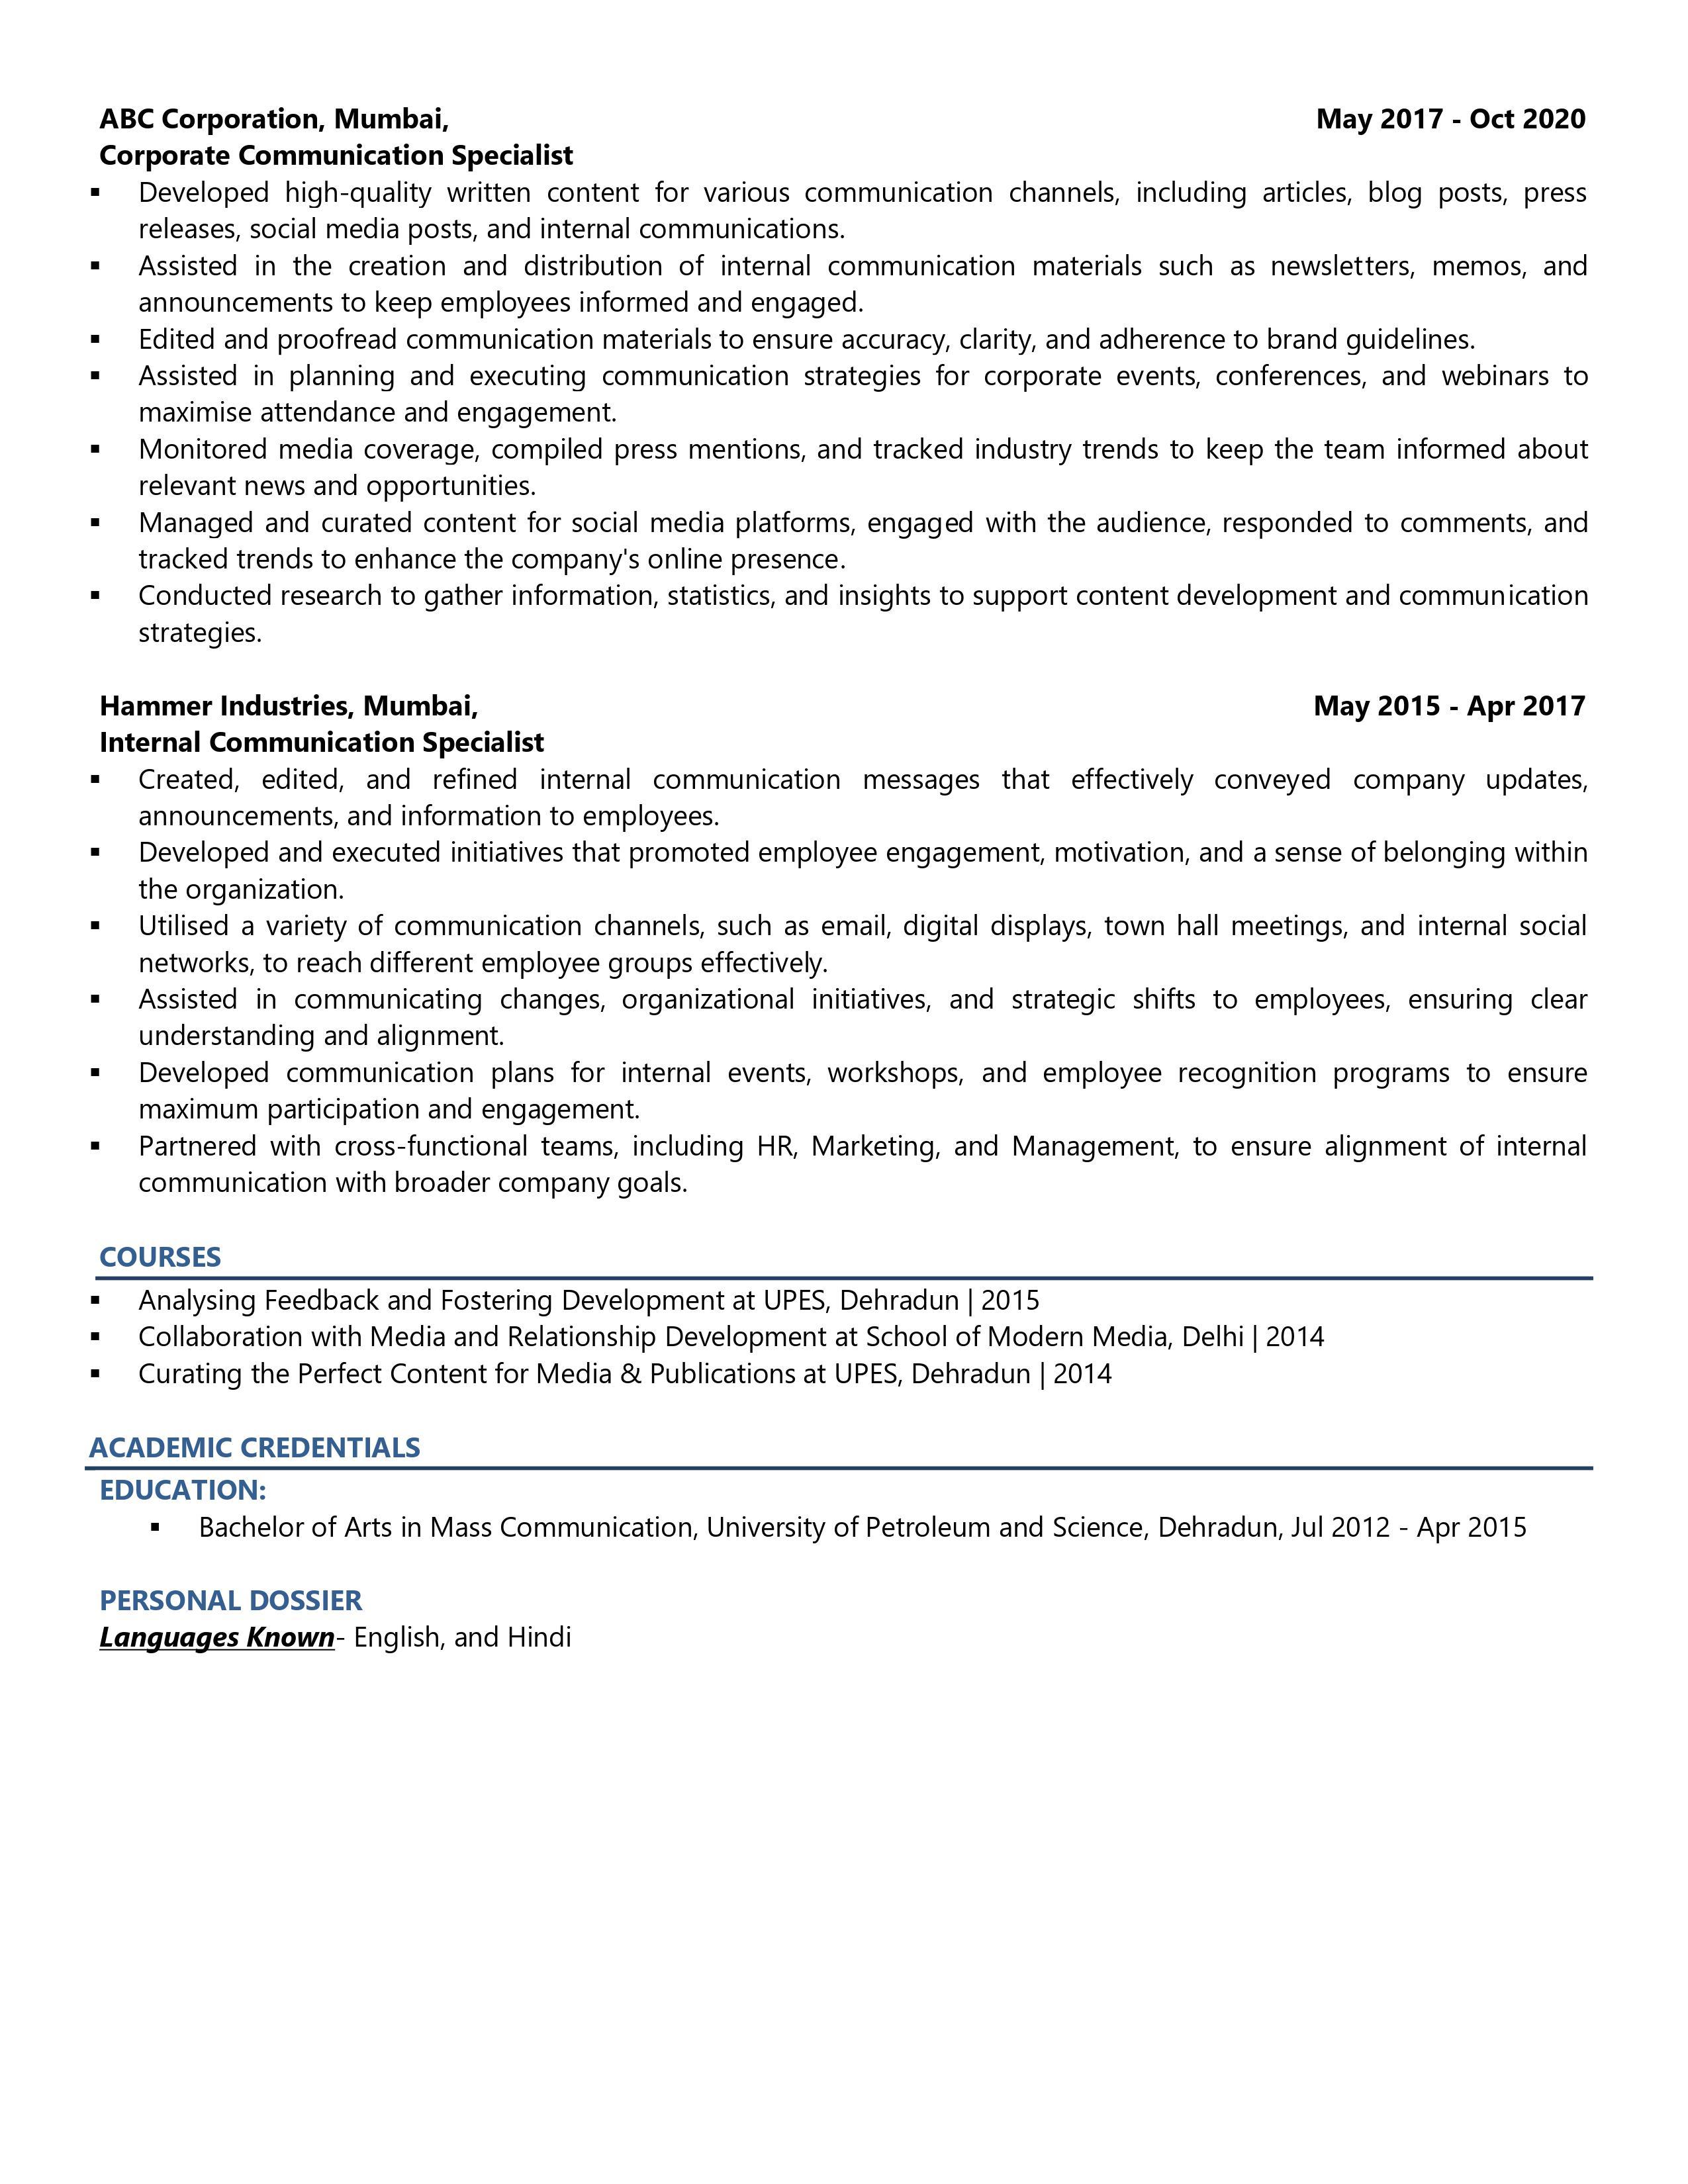 Corporate Communications Officer - Resume Example & Template